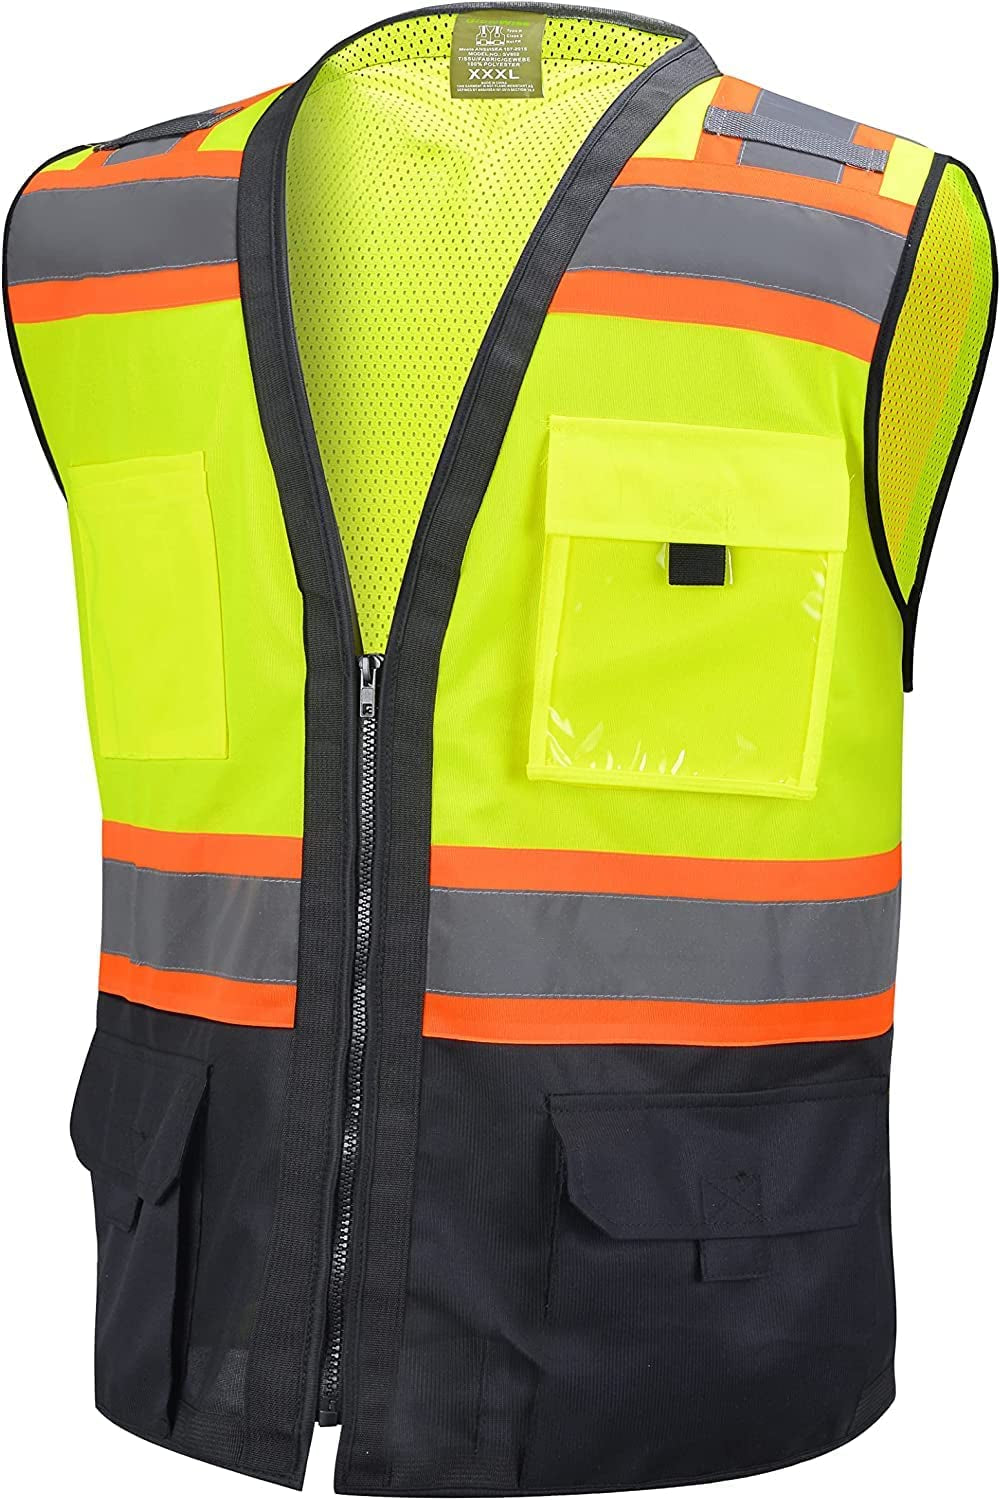 "Stay Visible and Safe with the  Surveyor Black/Lime Two Tone Safety Vest - ANSI/ISEA 107-2015 Certified with Photo ID Pocket!"